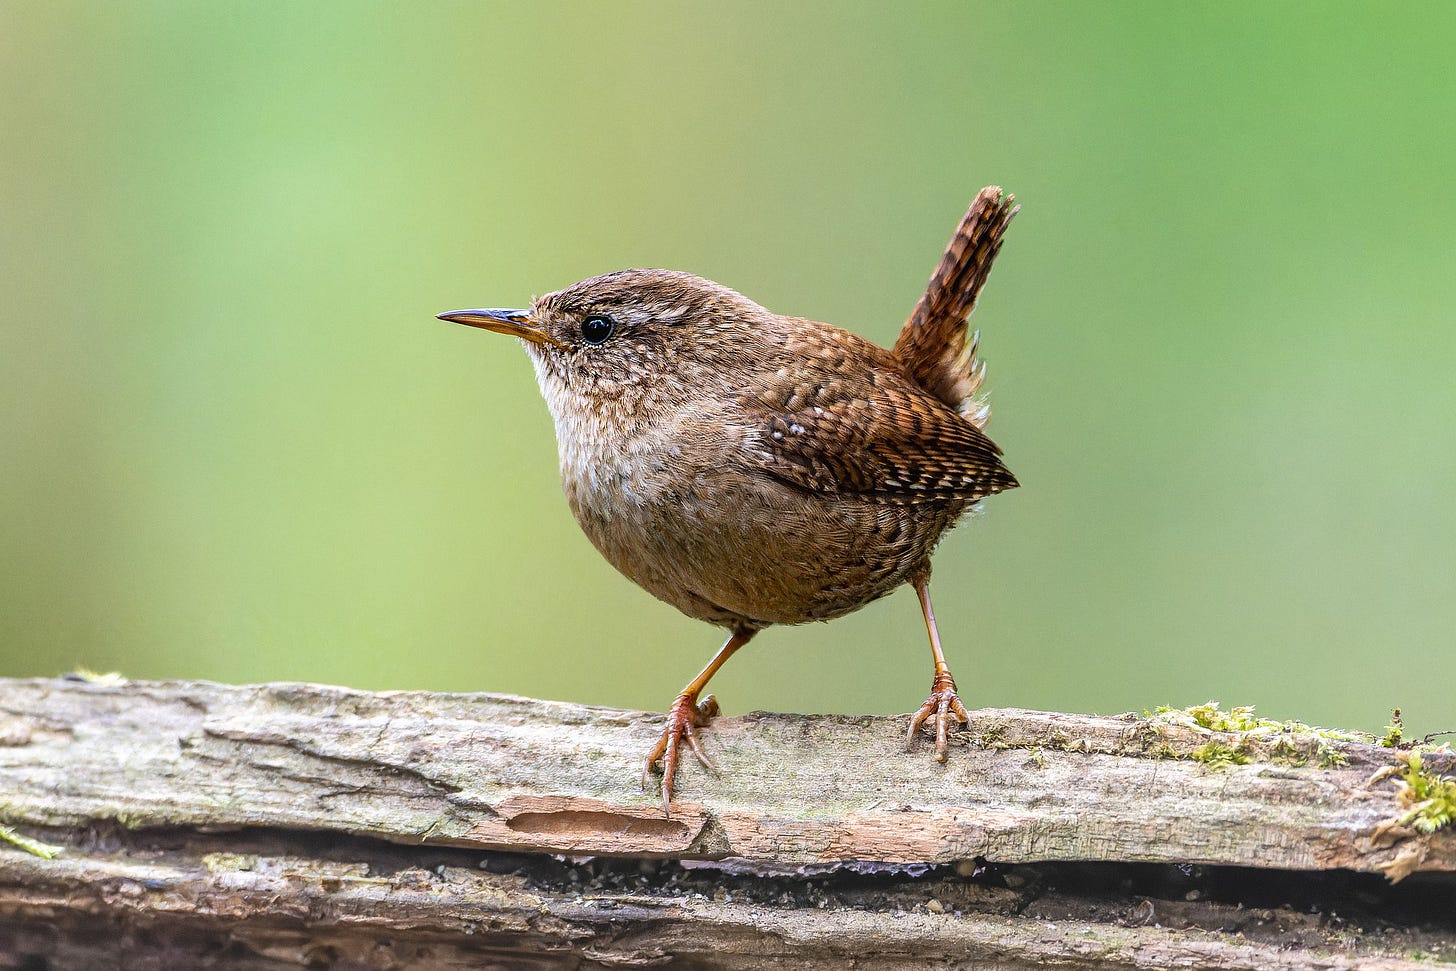 Small brown wren standing on a log with cocked tail against a diffuse green background